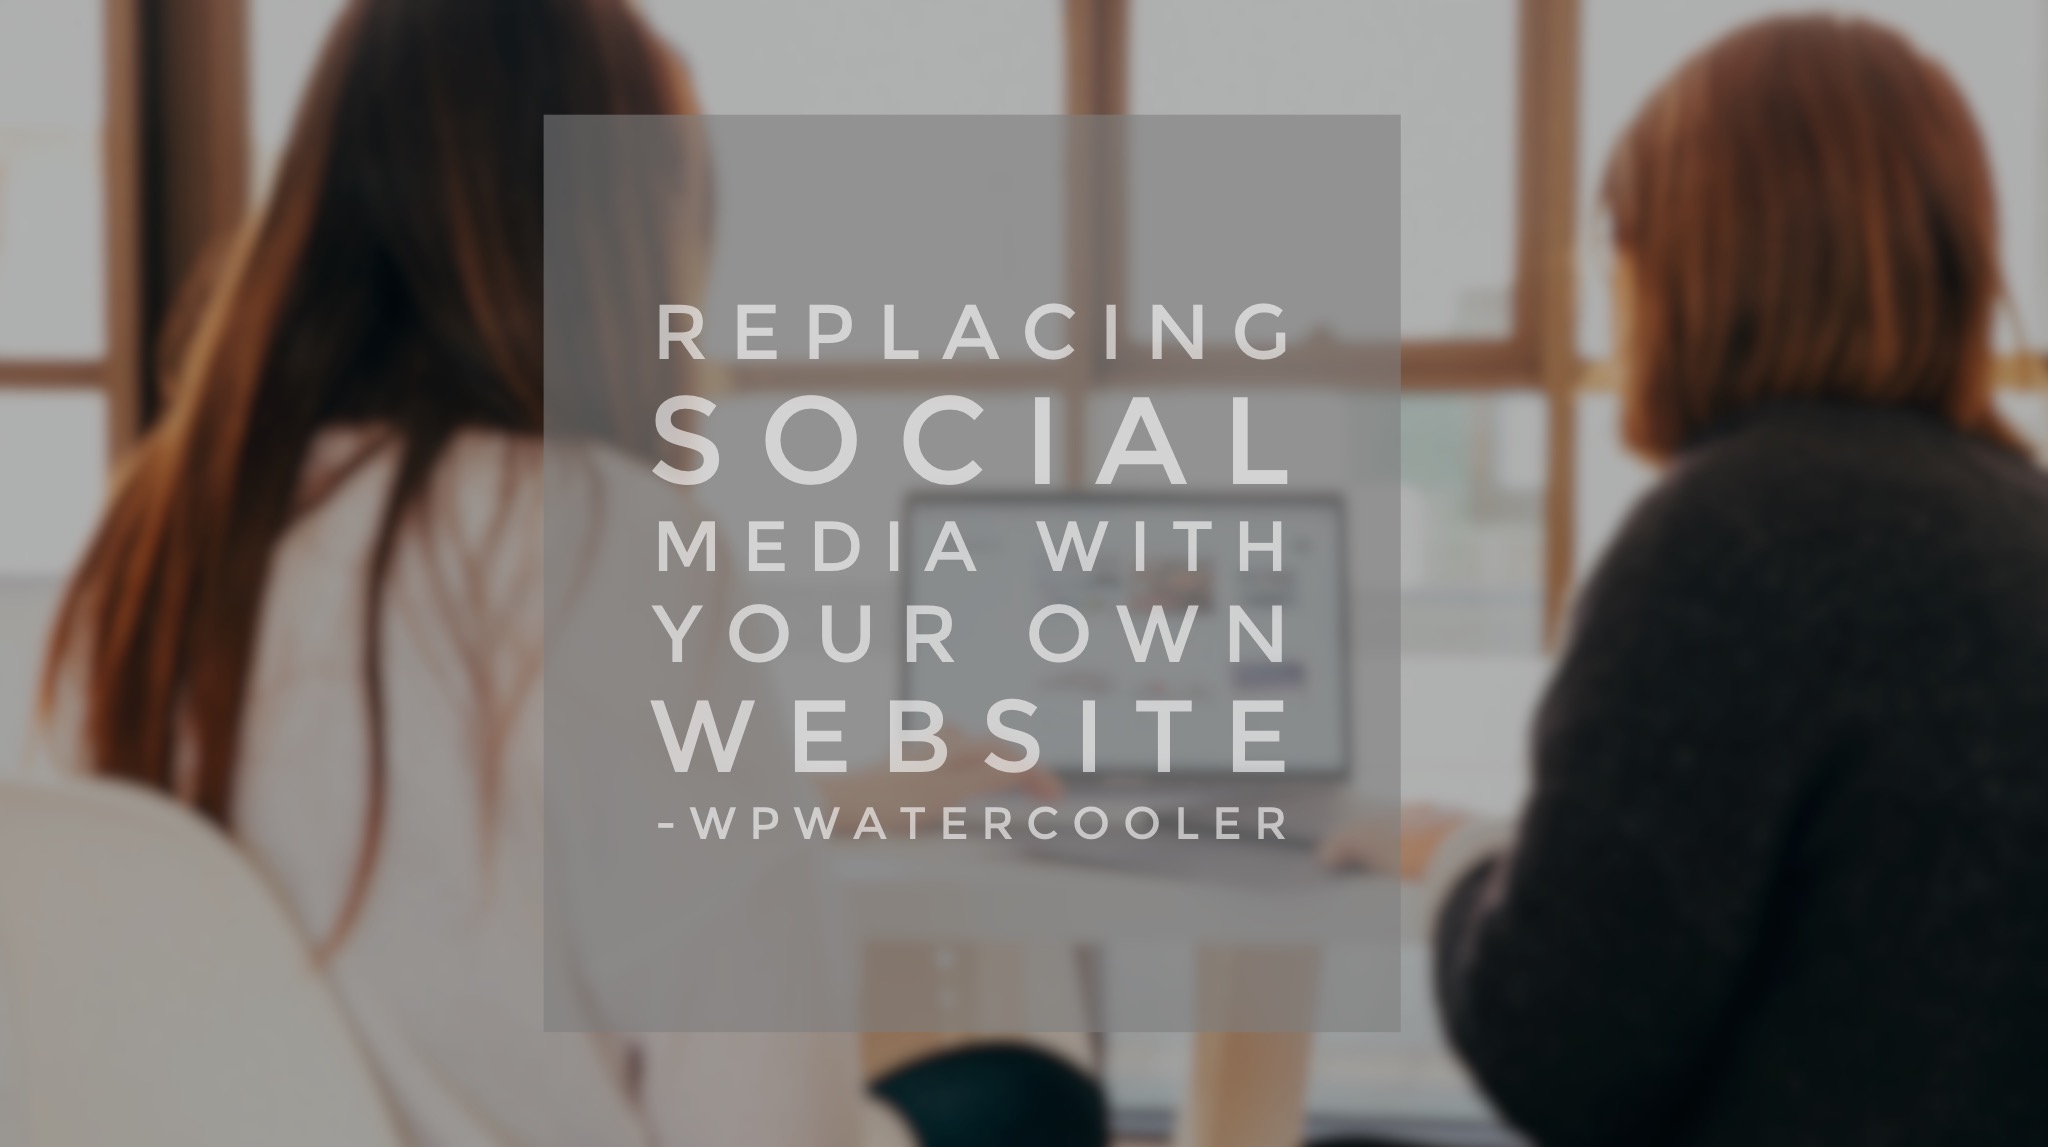 EP302 – Replacing social media with your own website – WPwatercooler